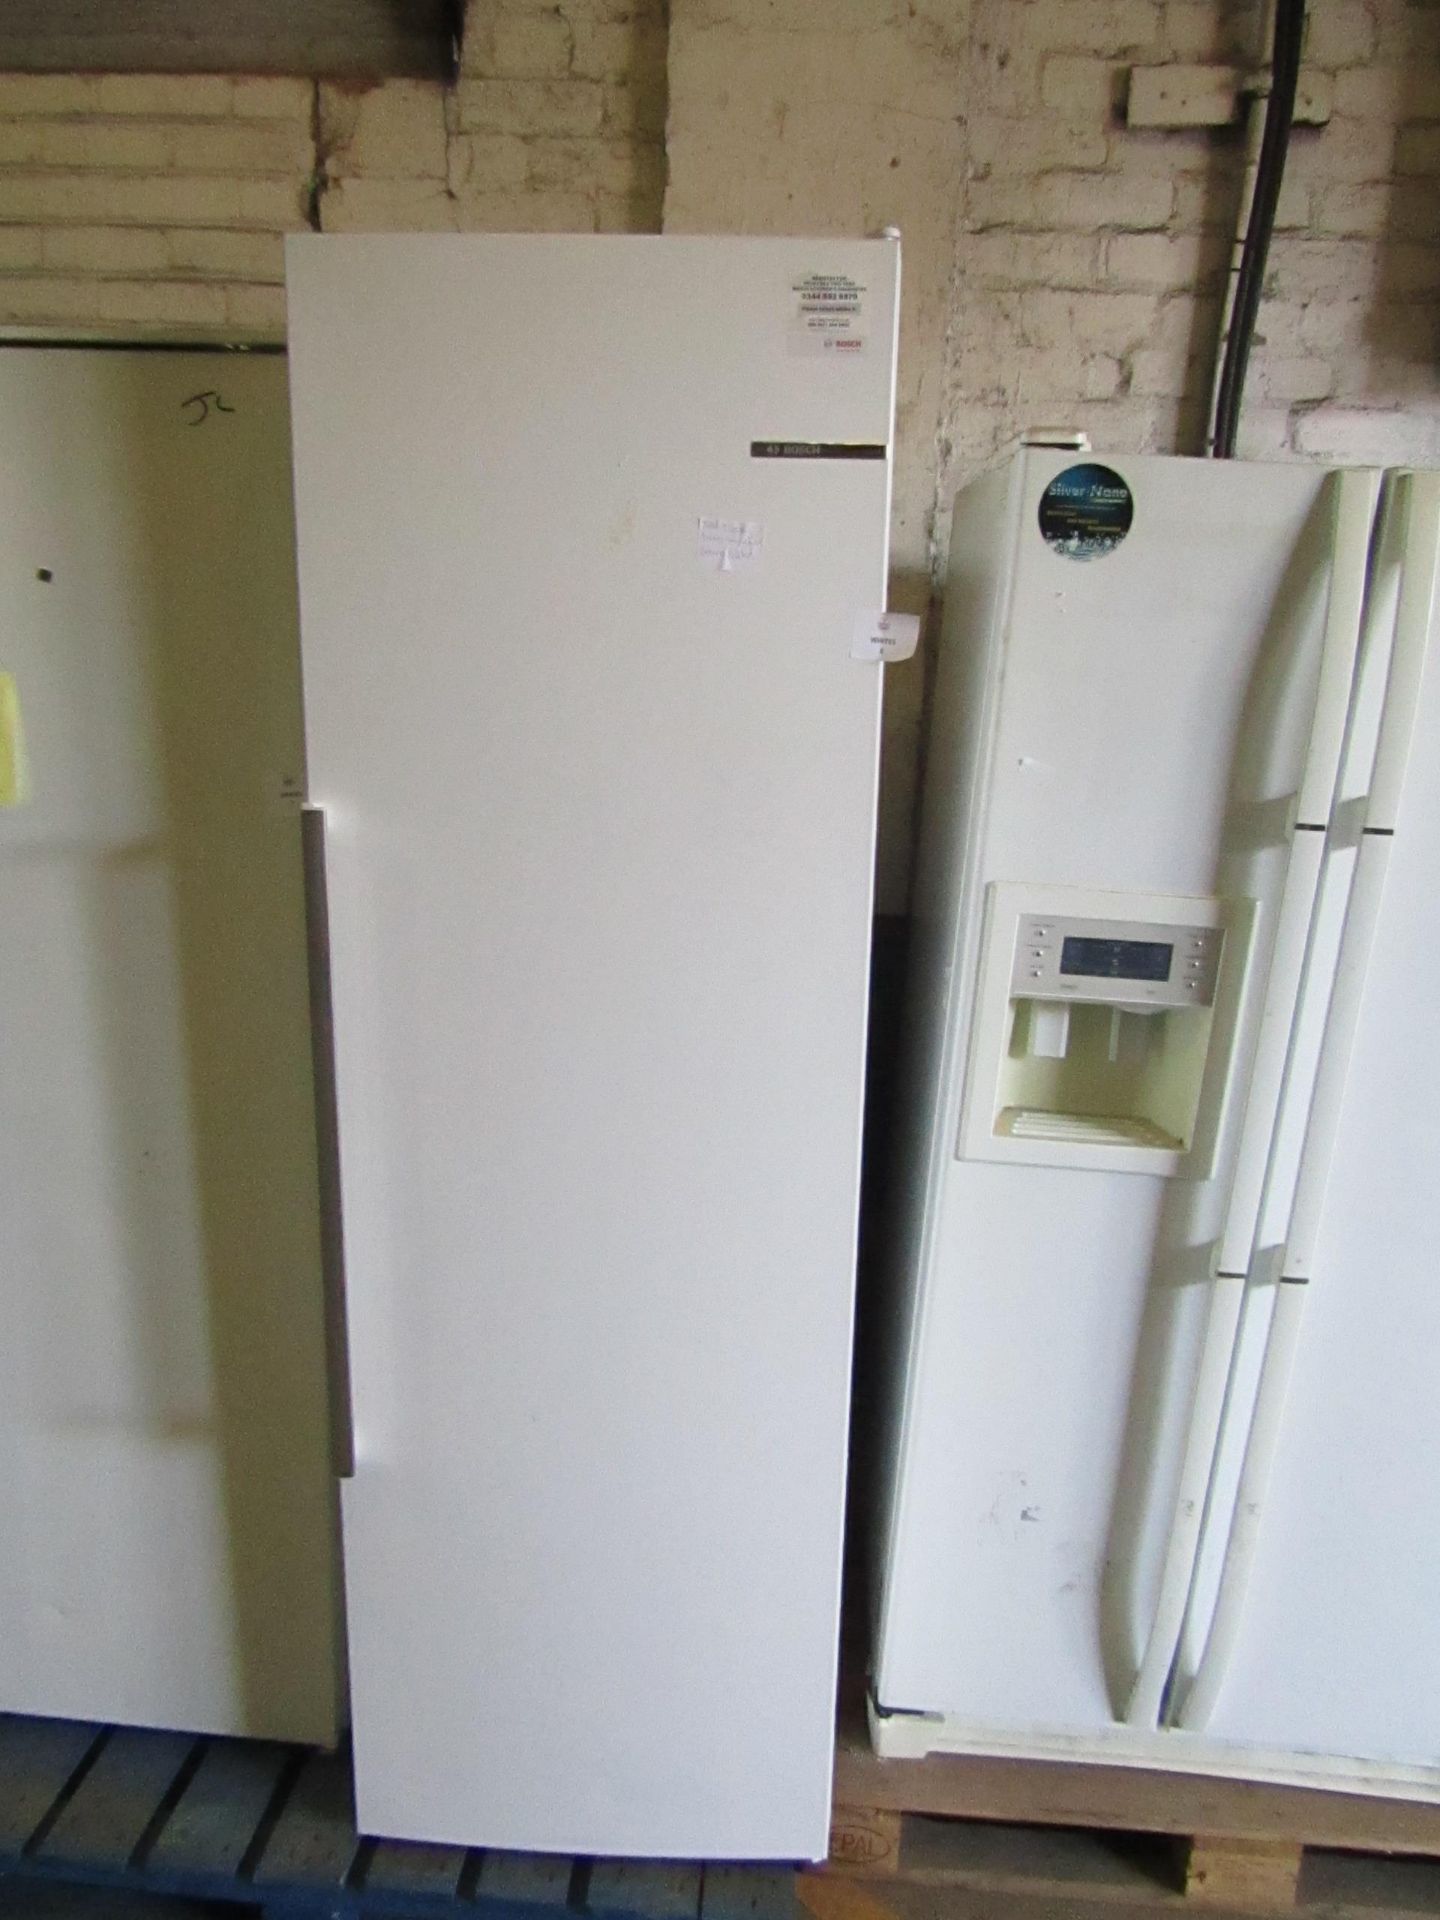 Bosch - Free-Standing Tall Fridge - Item Powers On But Does Not Get Cold.